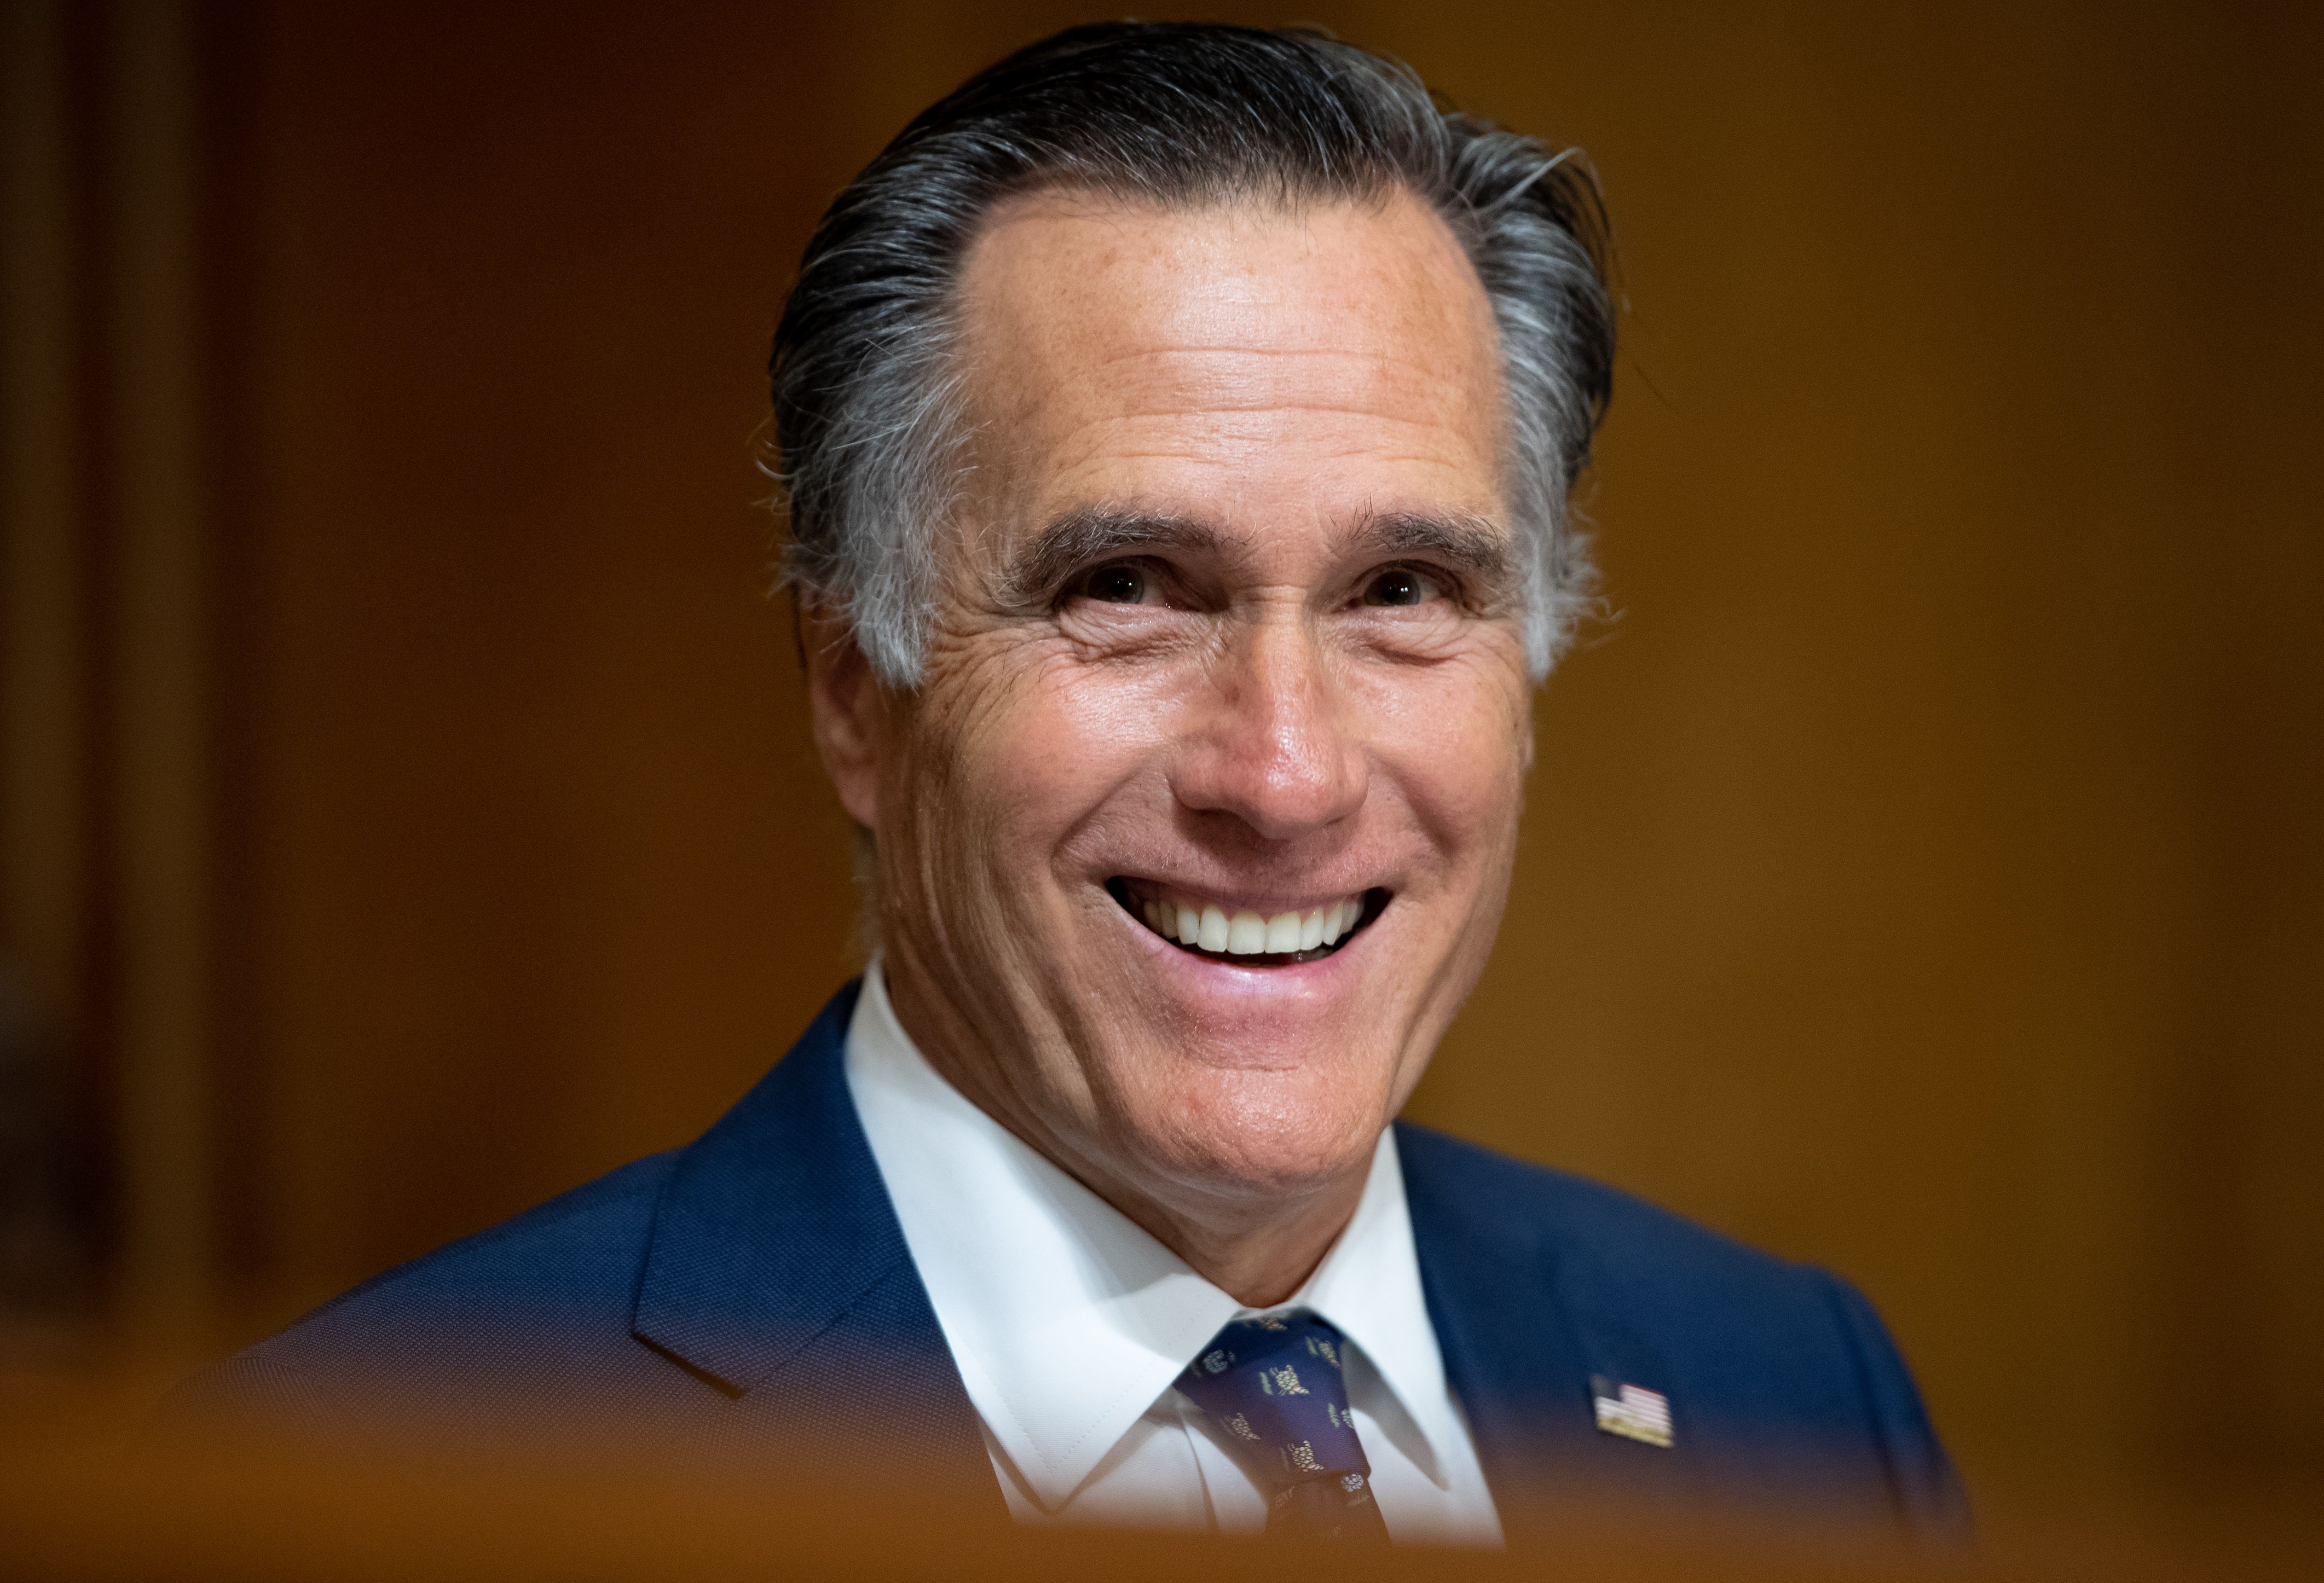 US Senator Mitt Romney, Republican of Utah, attends a Senate Foreign Relations Committee hearing about Turkey's actions in Syria on Capitol Hill in Washington, DC, October 22, 2019. (Photo by SAUL LOEB / AFP)